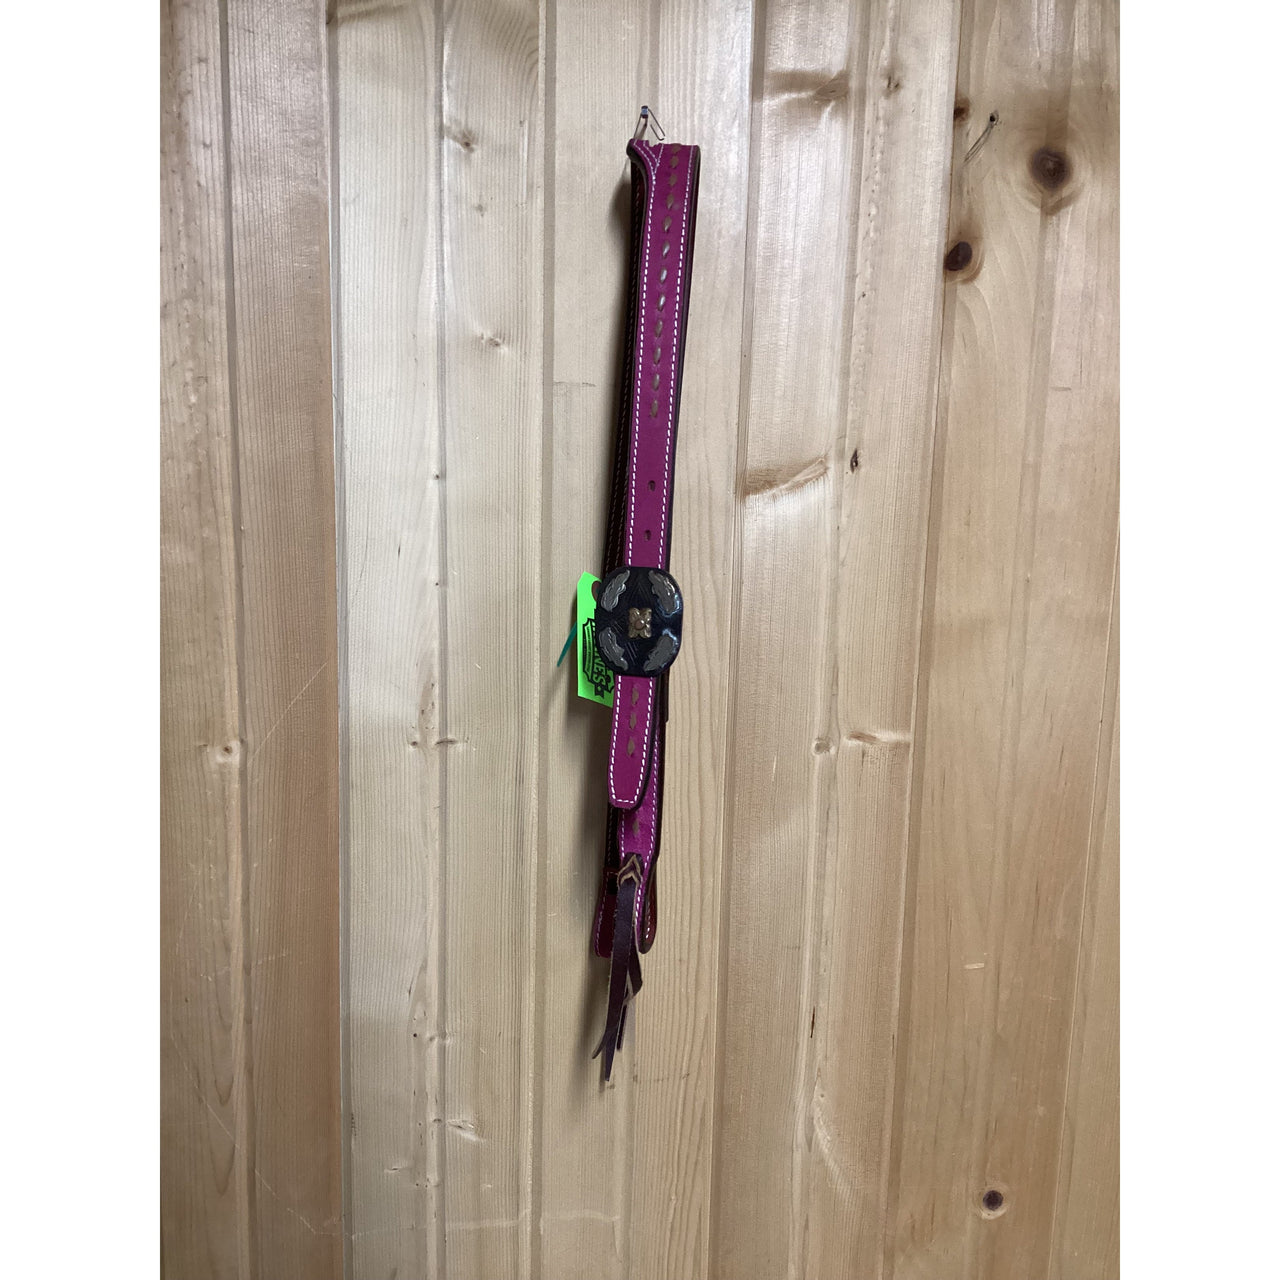 Irvine Bucked Stitched Ear Headstall